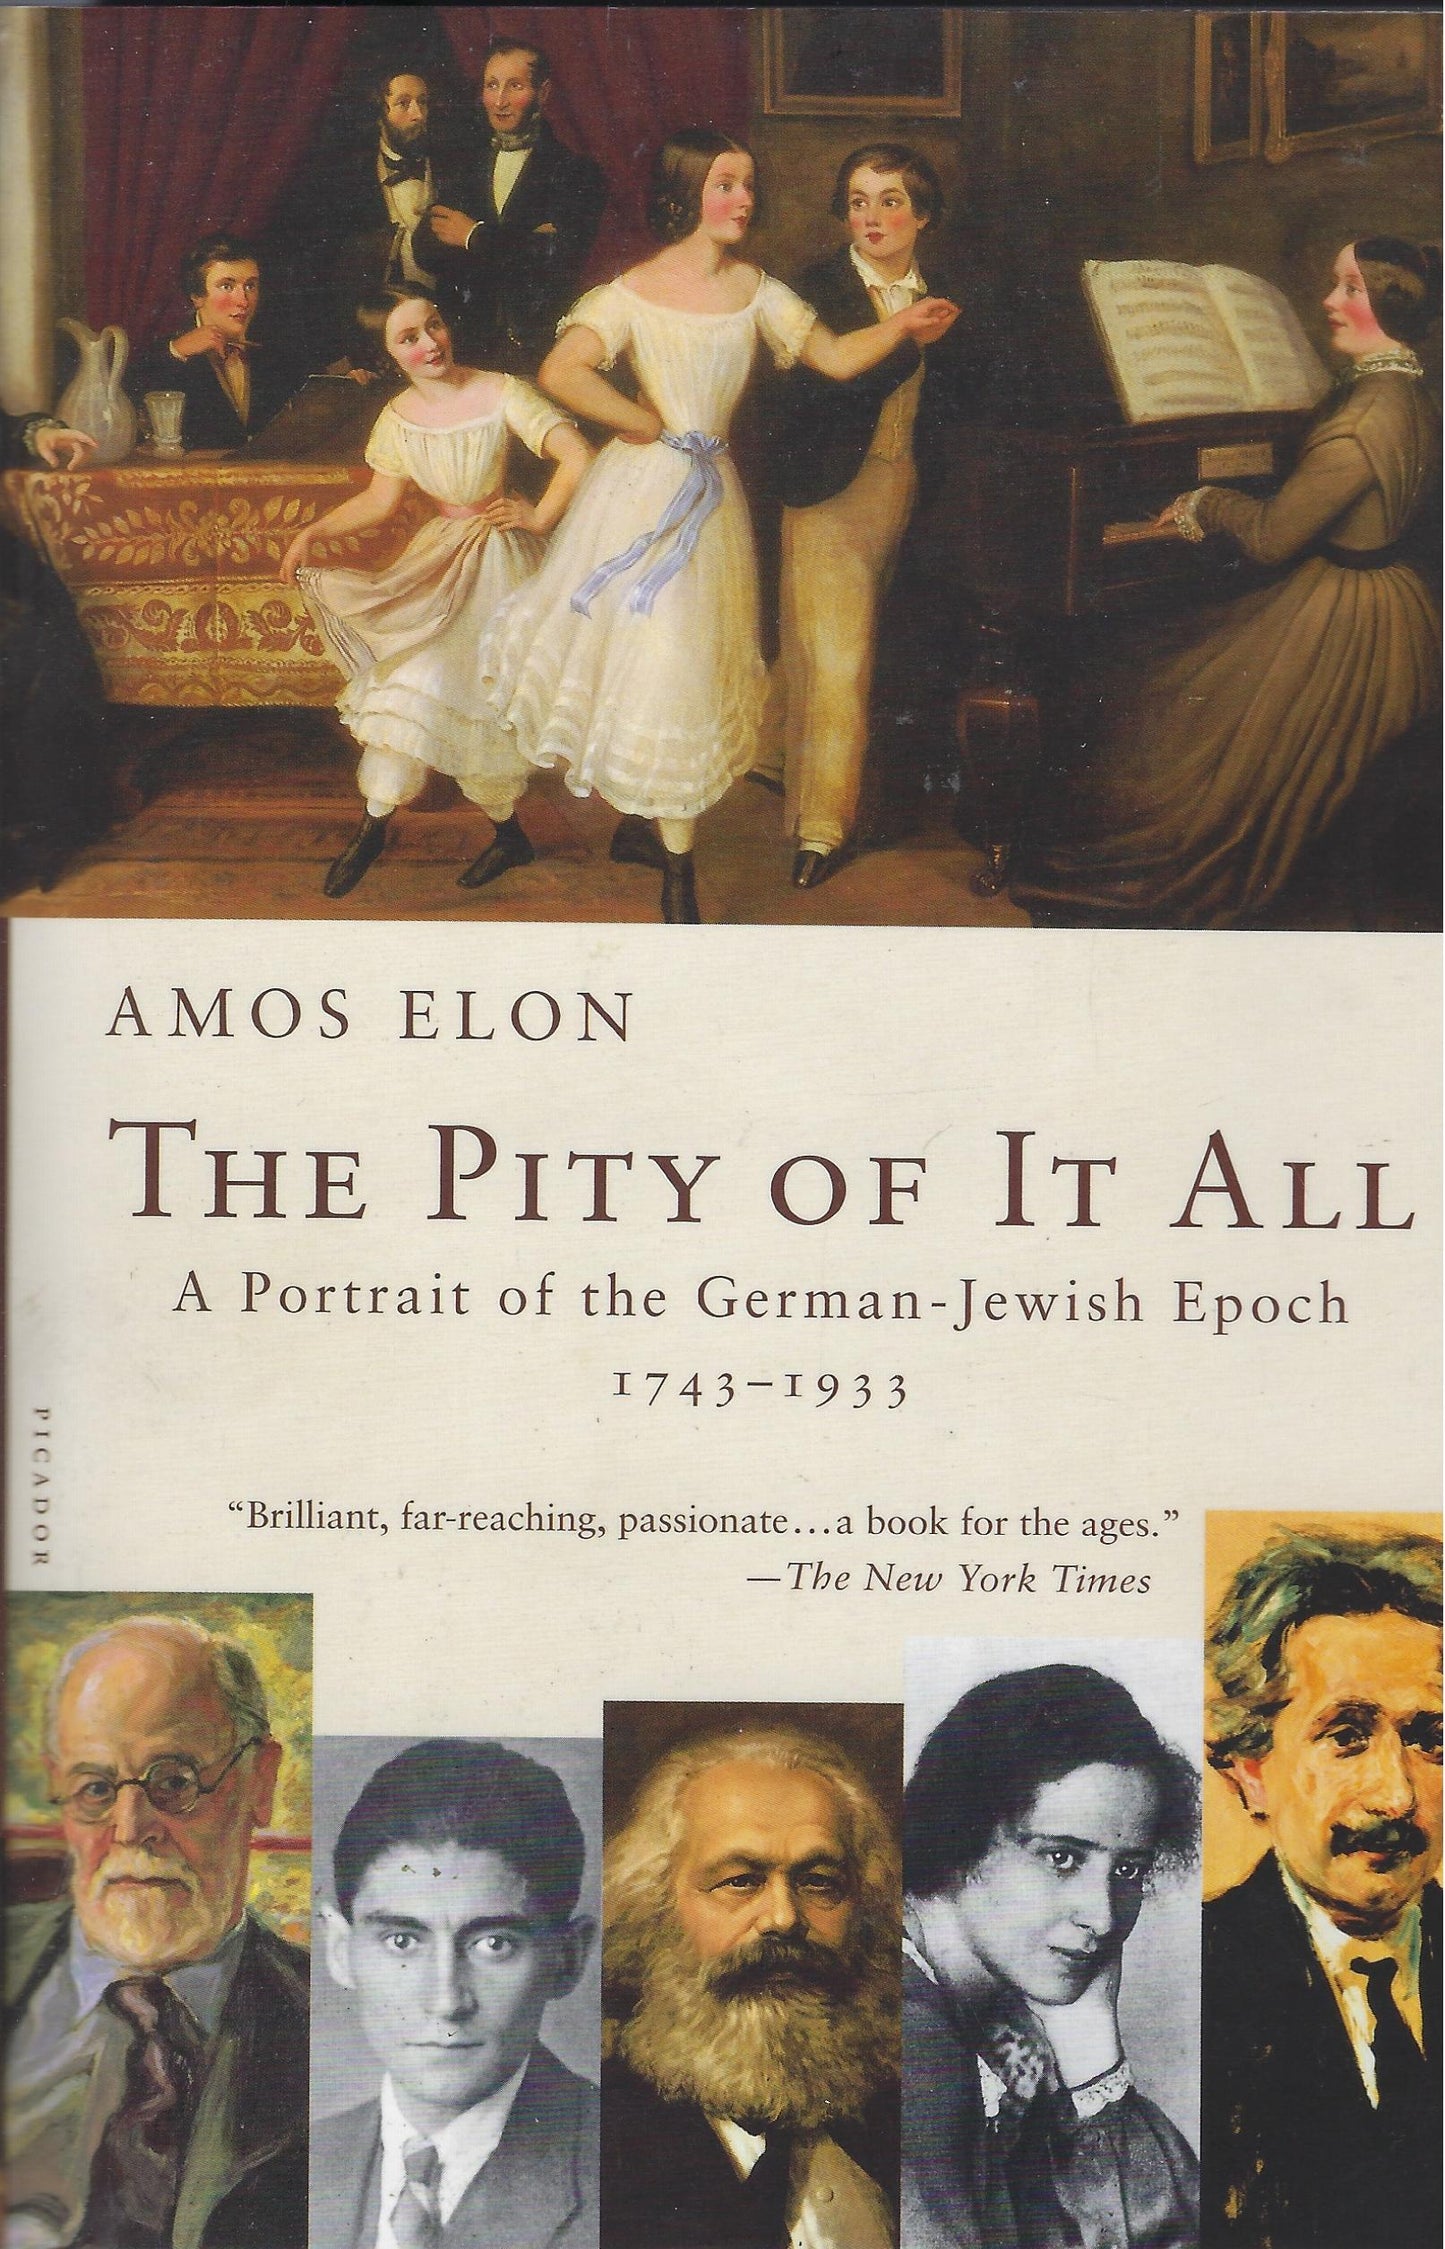 The Pity of It All / A Portrait of the German-Jewish Epoch, 1743-1933